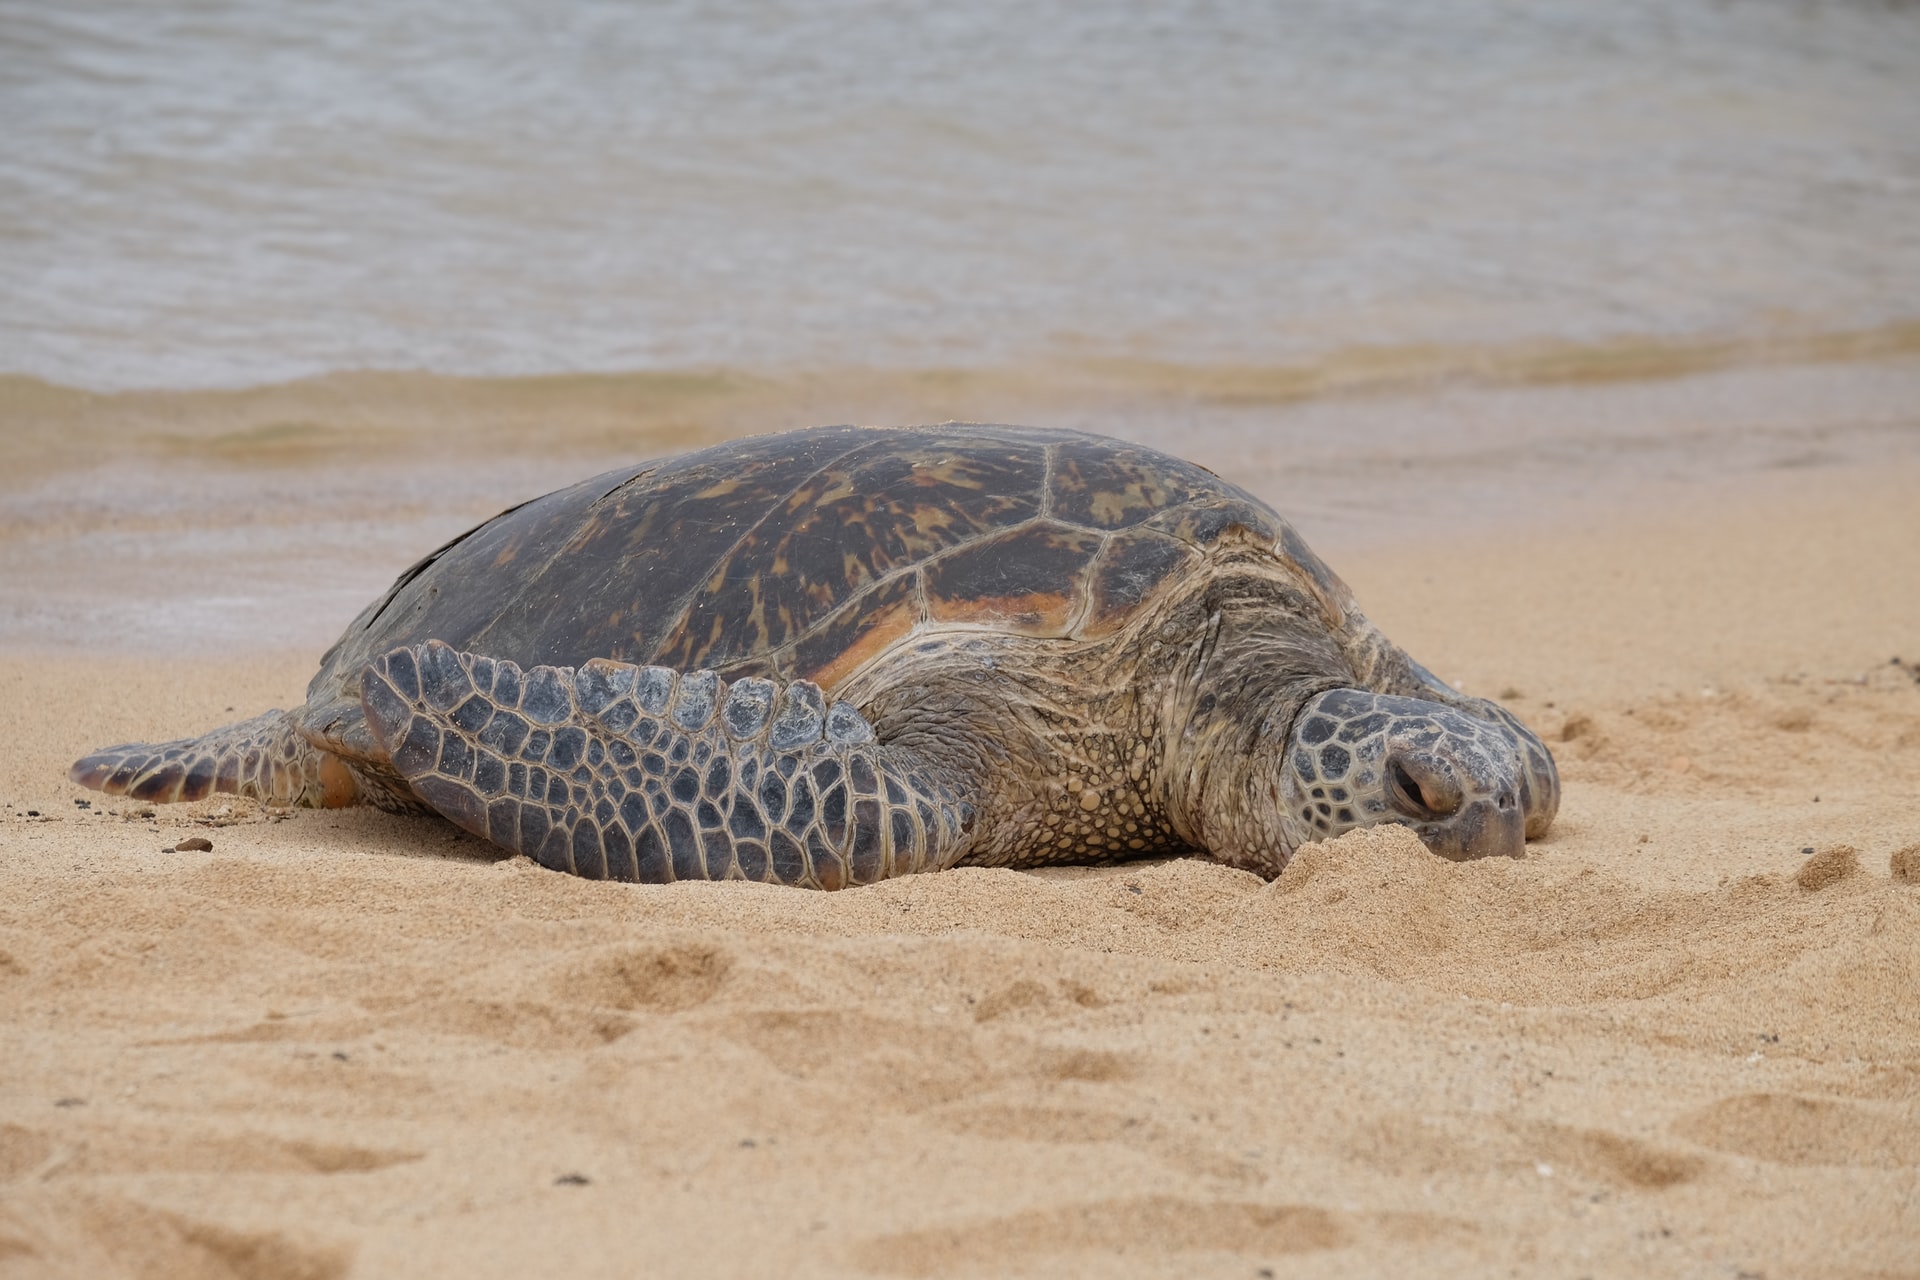 If it weren’t for the hundreds of people who gathered decades of data across Aldabra’s more than 50 beaches, it would have been difficult to track the progress made in turtle conservation.